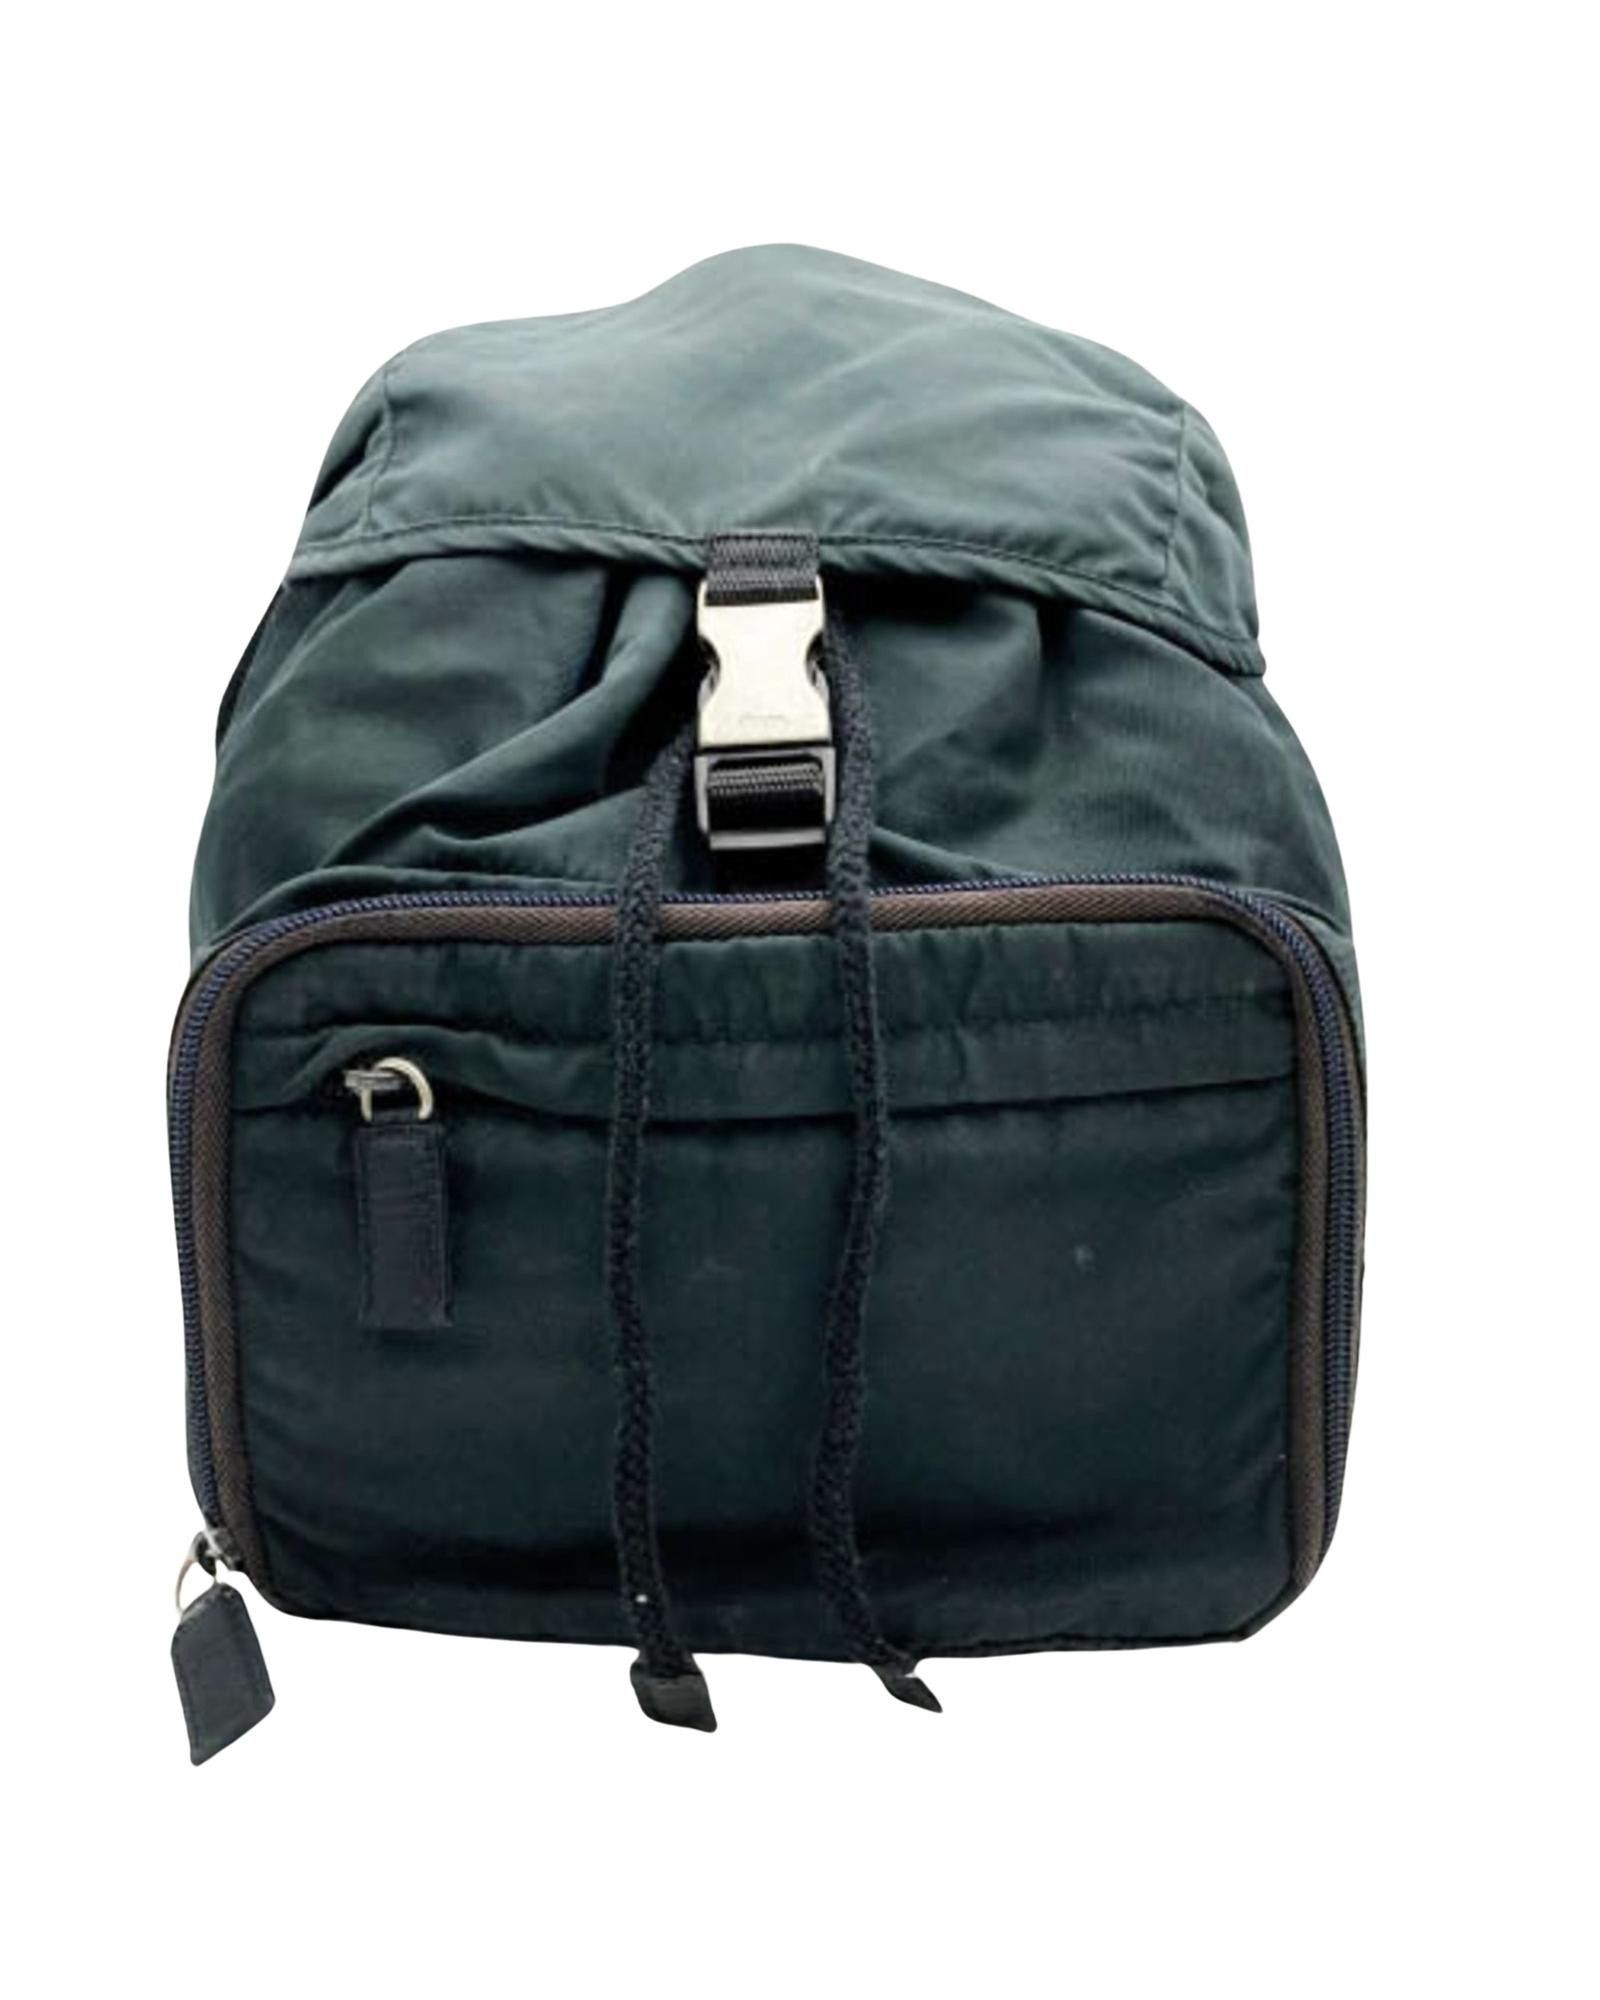 Prada Nylon Backpack with Ample Storage Space and Lightweight Design ...